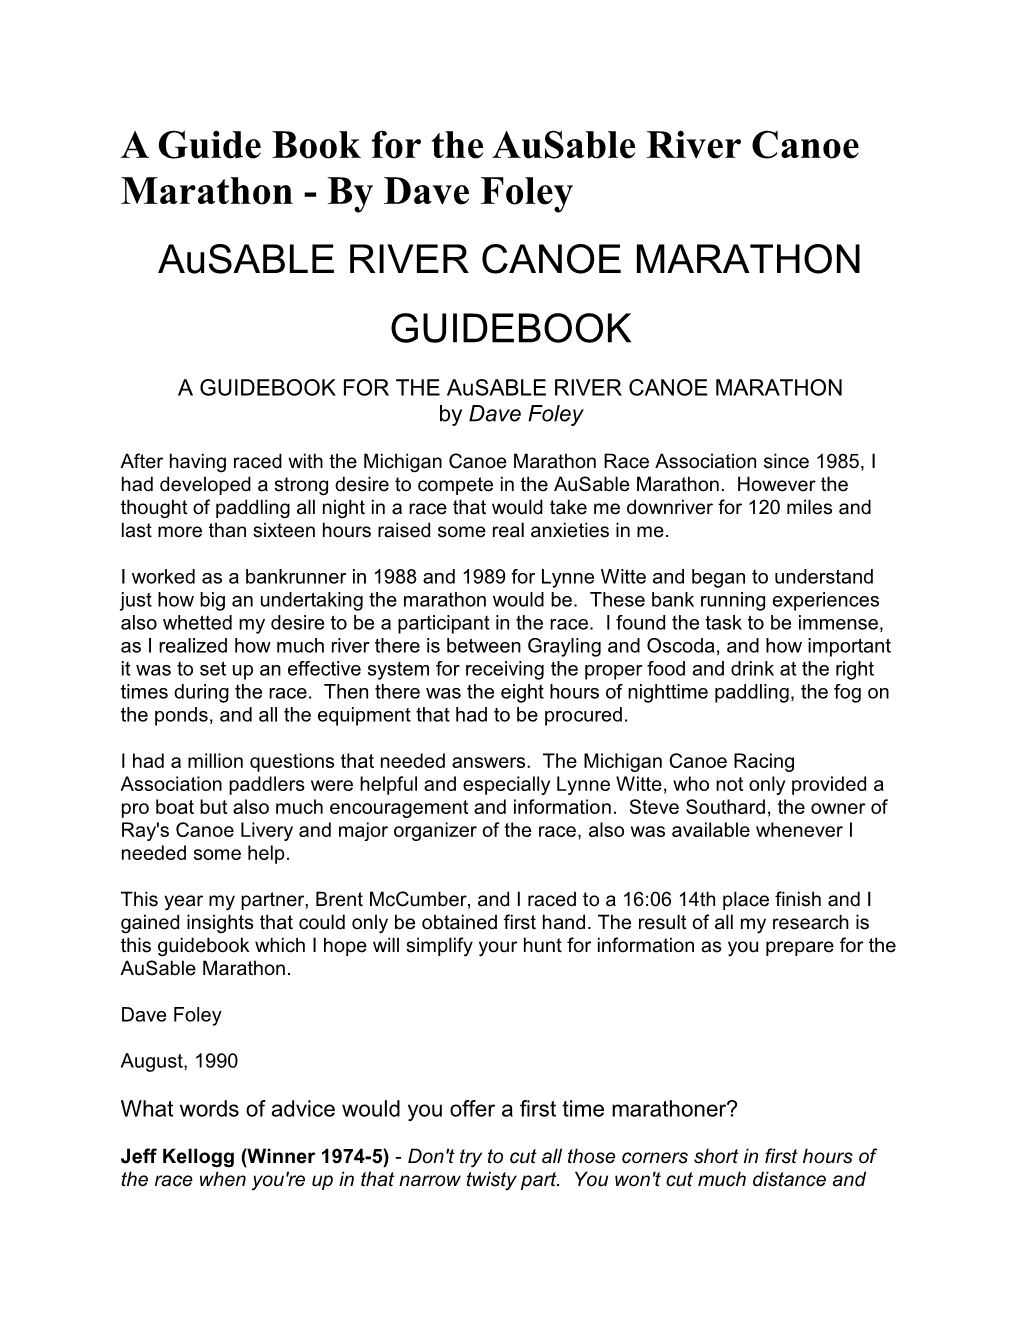 A Guide Book for the Ausable River Canoe Marathon - by Dave Foley